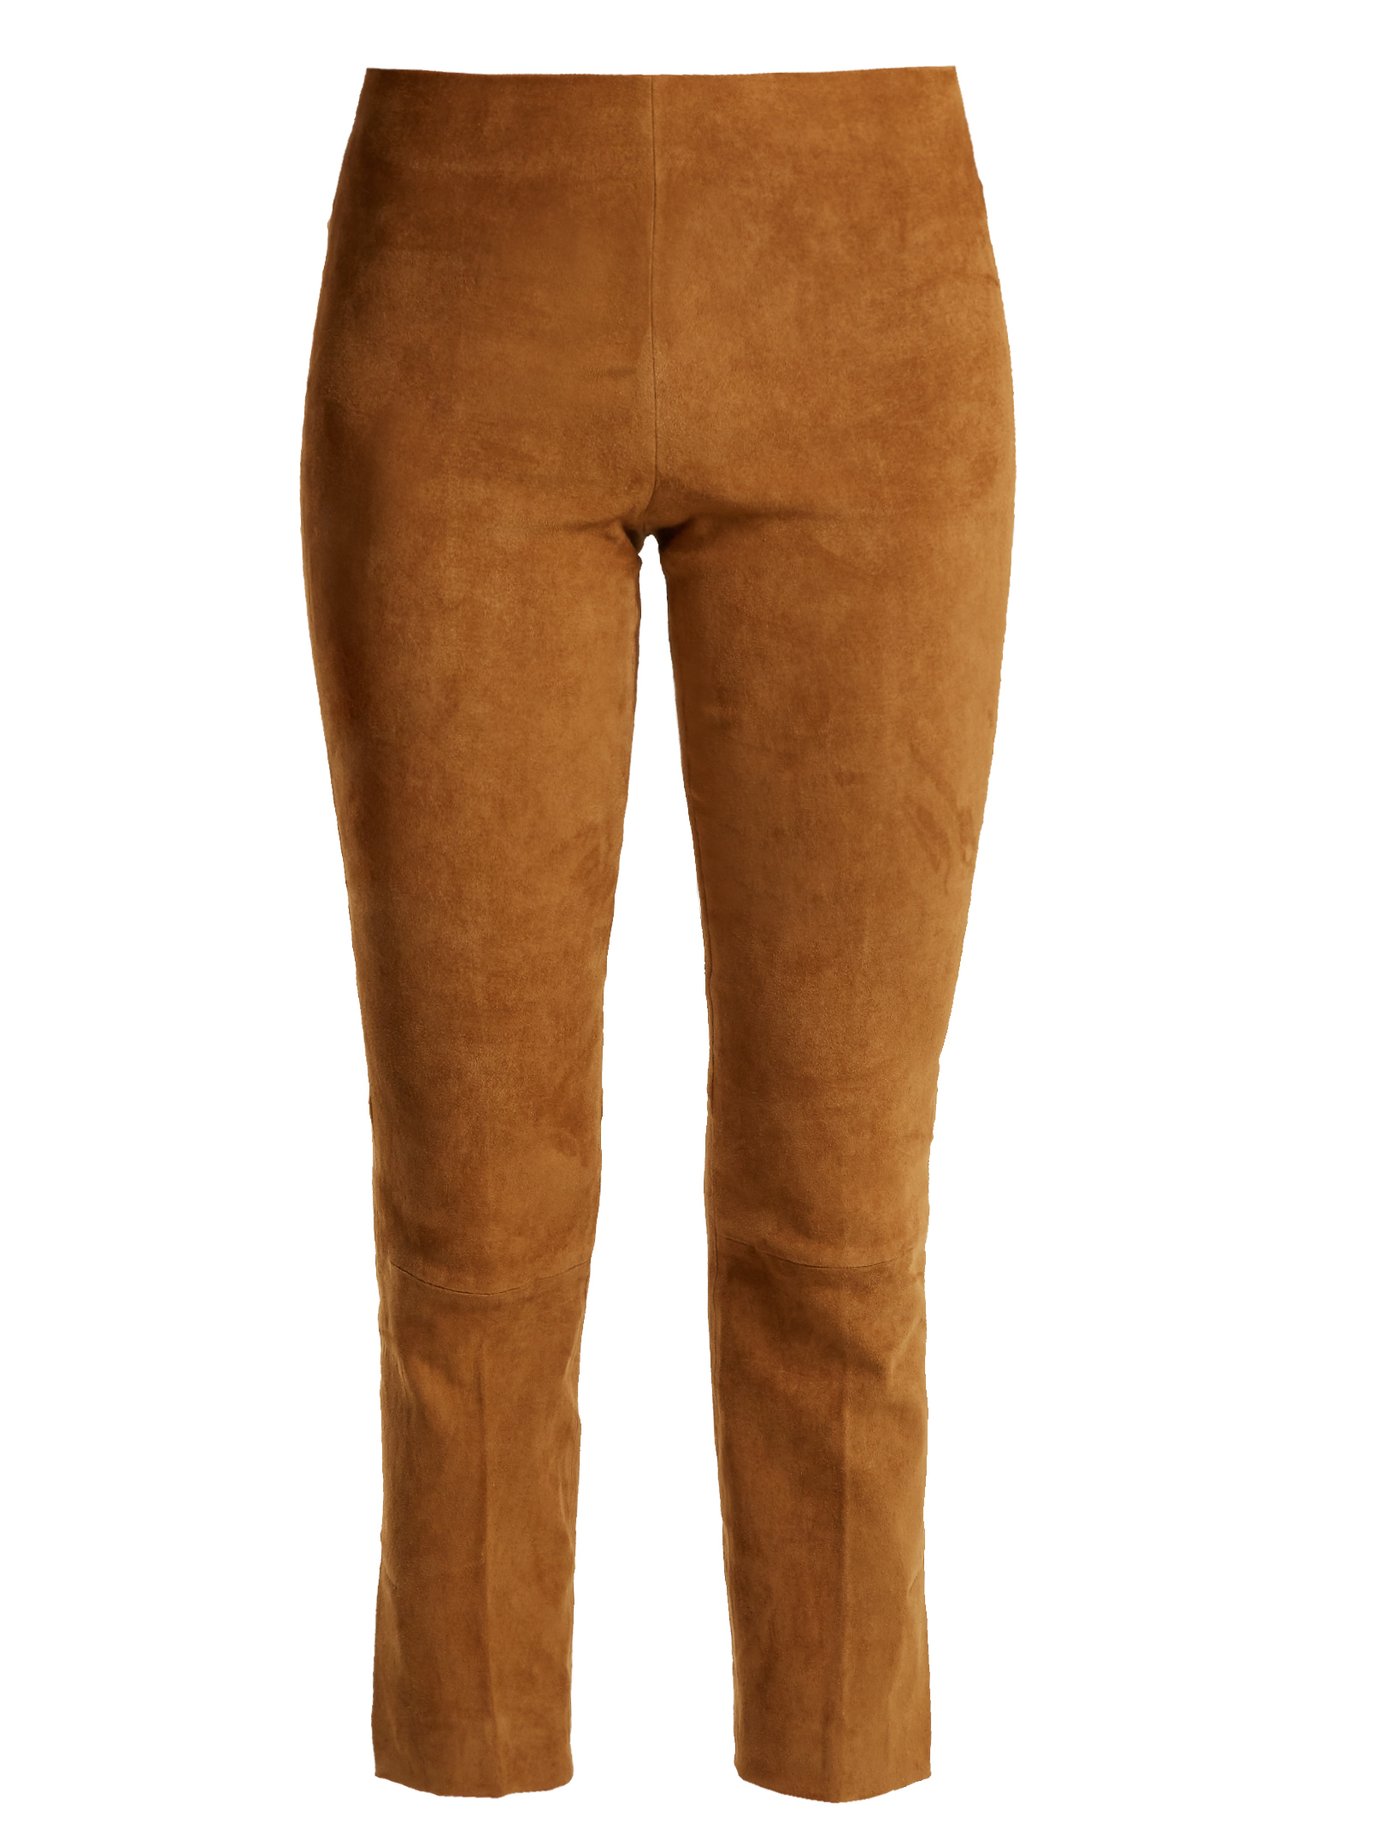 VINCE Stretch Suede Cropped Pants in Doe | ModeSens